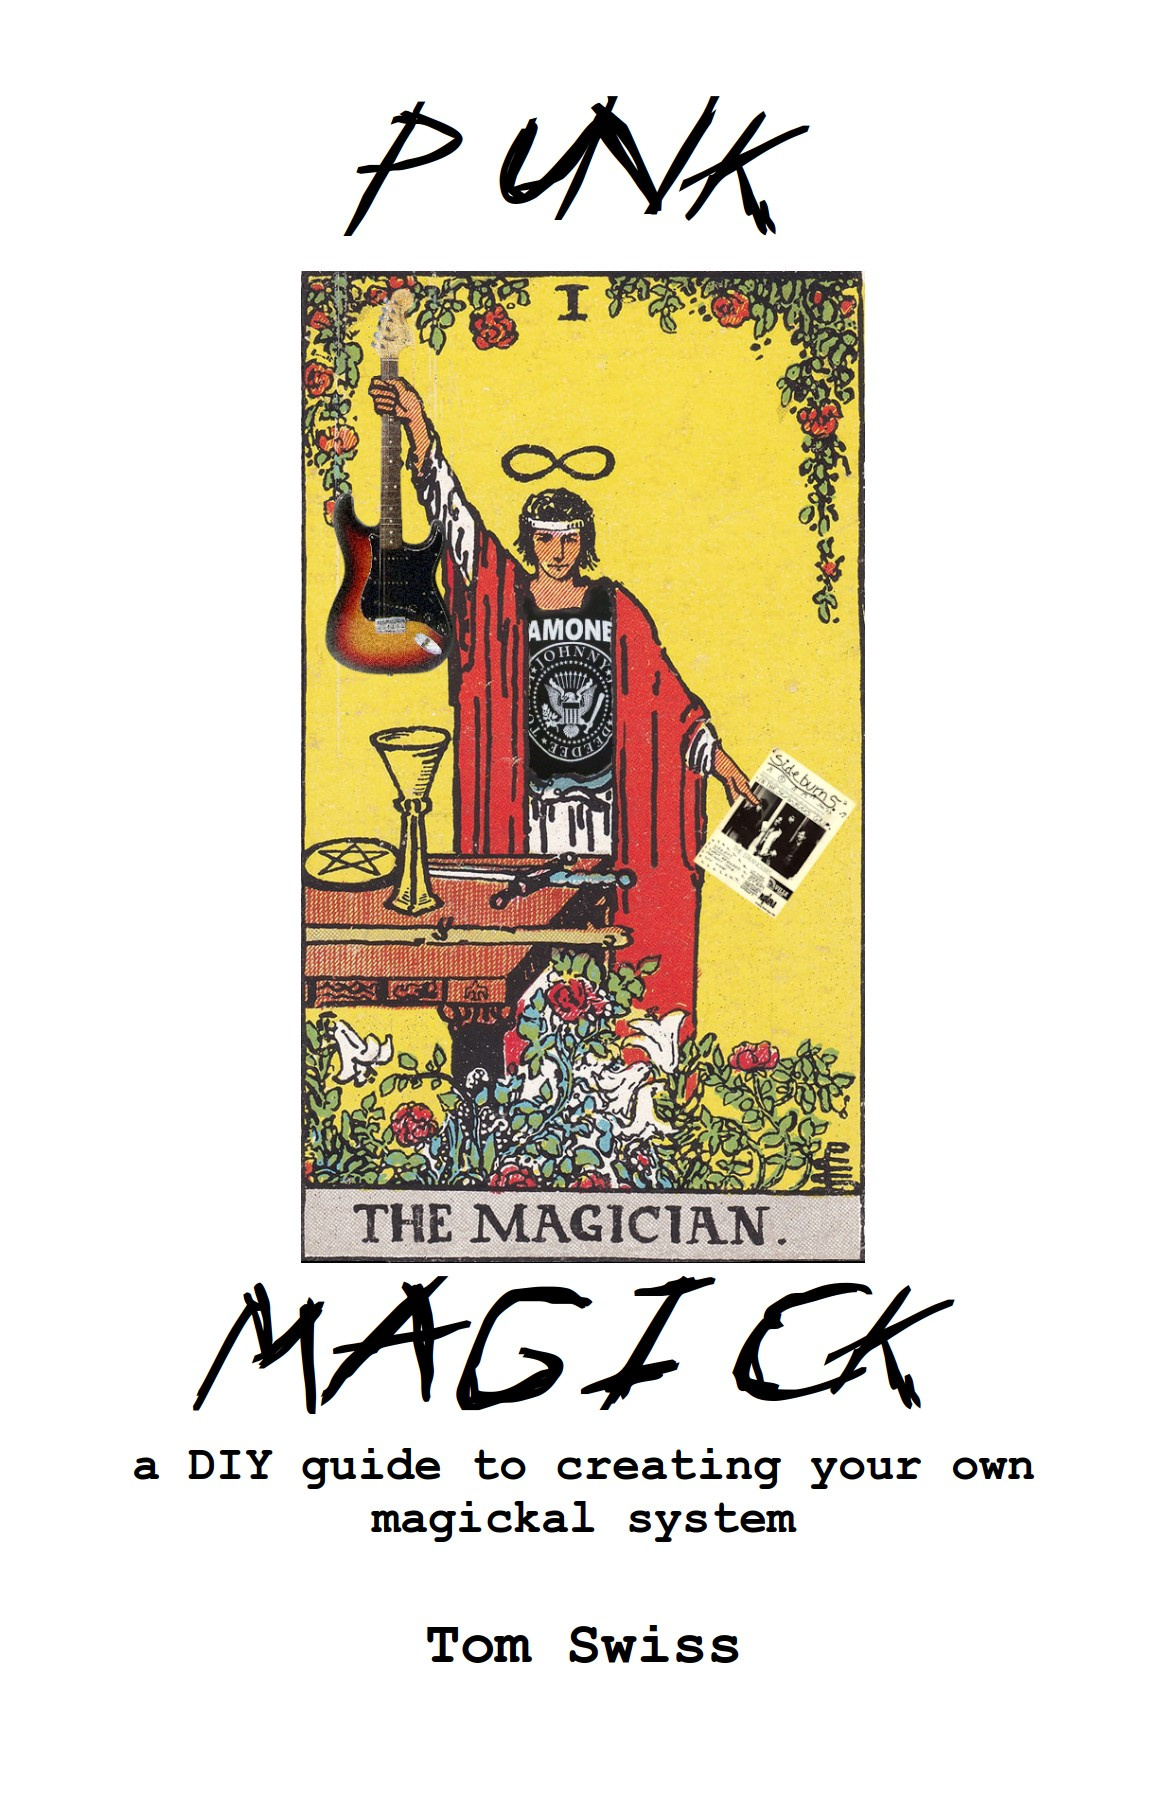 Punk Magick a DIY guide to creating your own magickal system by Tom Swiss